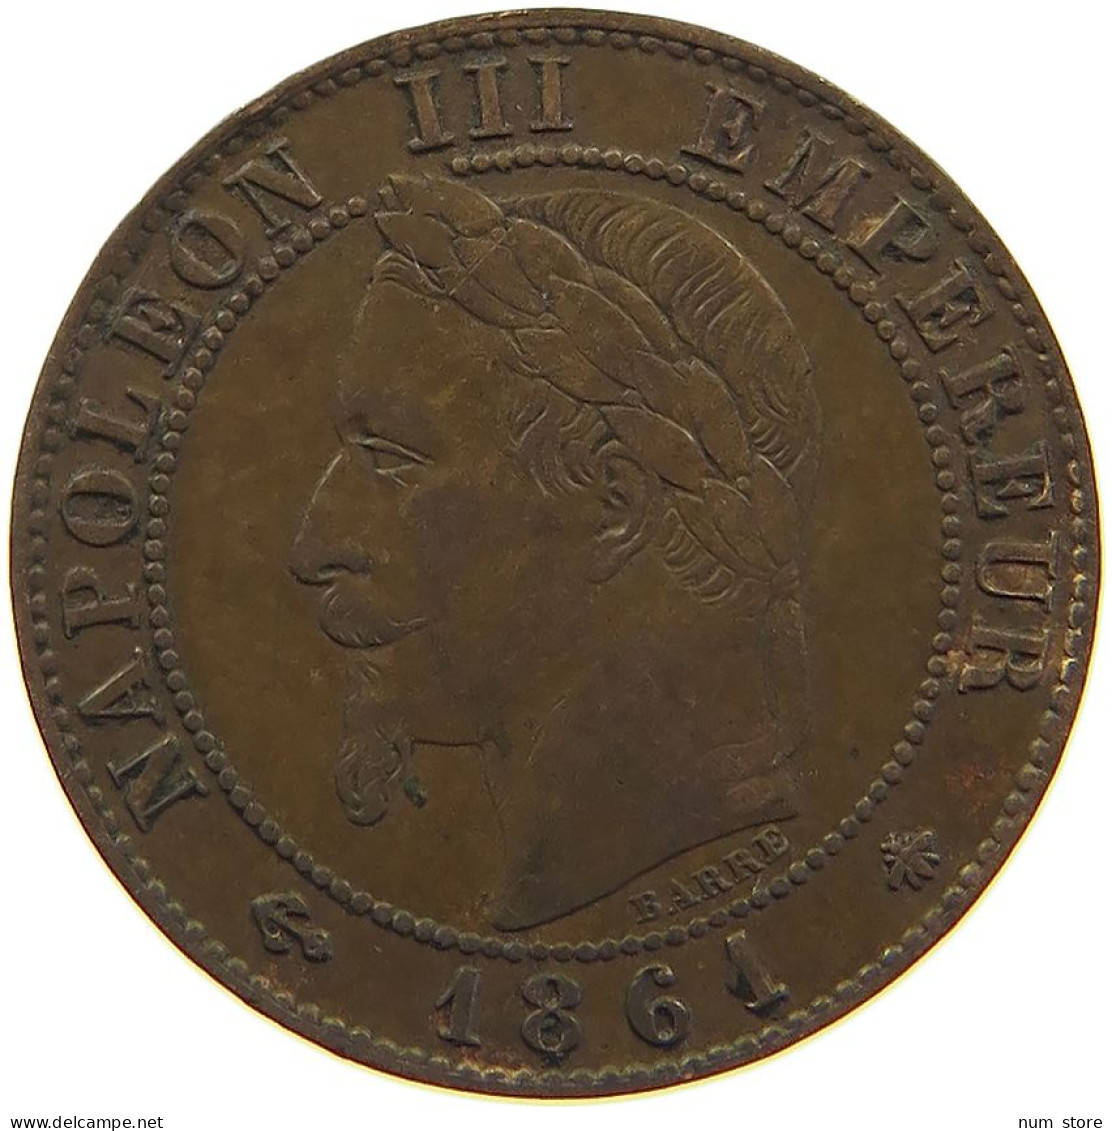 FRANCE CENTIME 1861 A Napoleon III. (1852-1870) #a086 0141 - 1 Centime